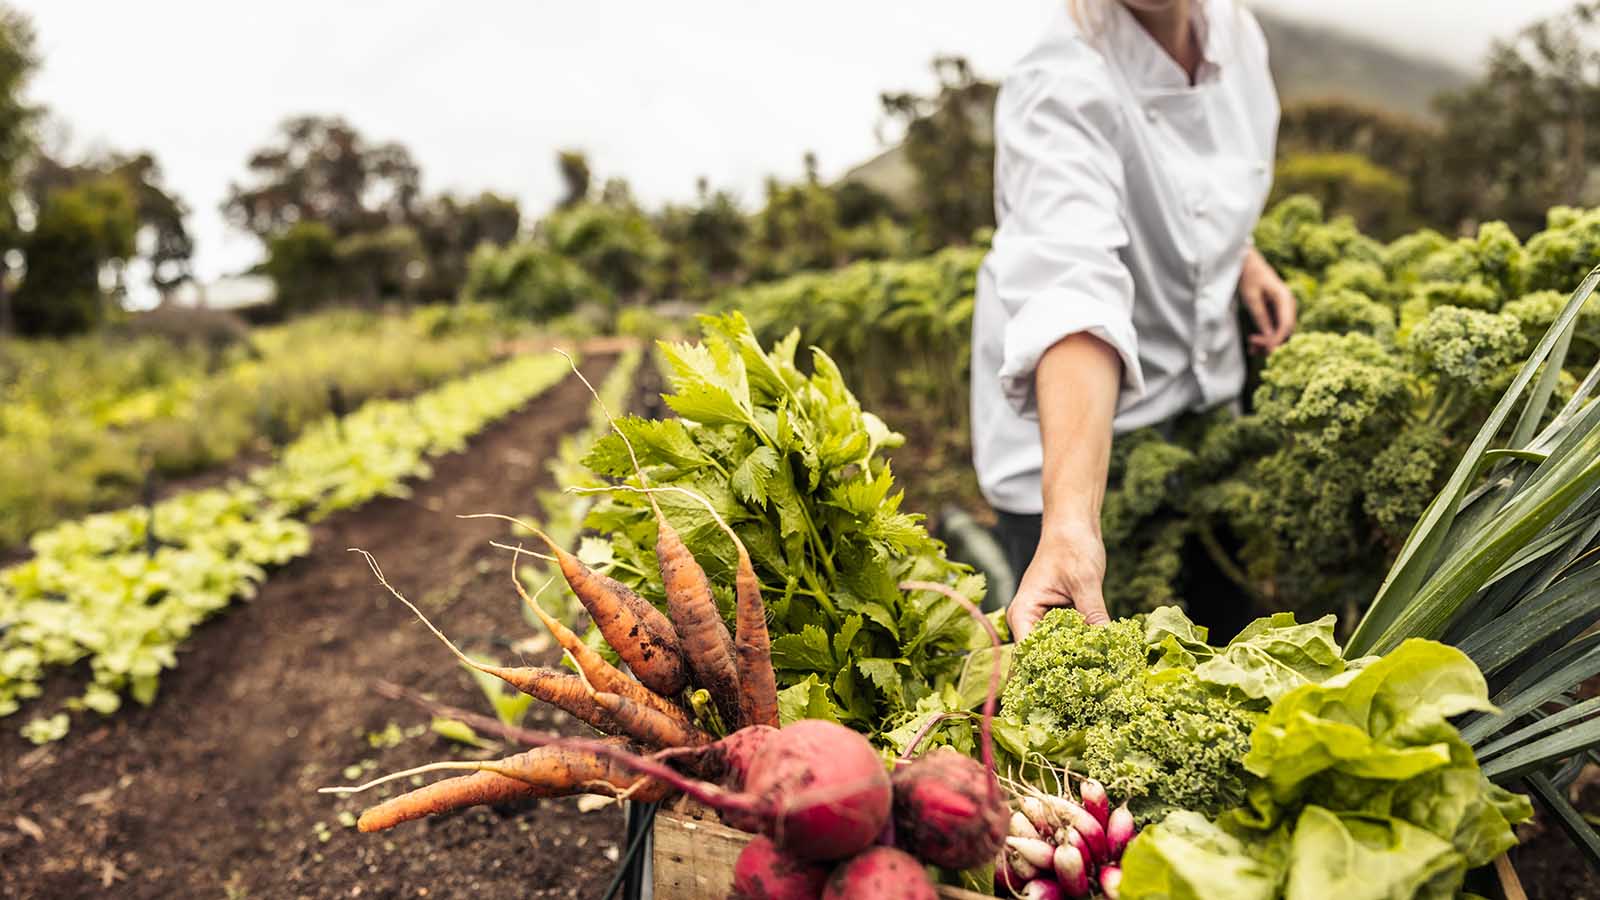 Self-sustainable female chef arranging a variety of freshly picked produce into a crate on an organic farm.